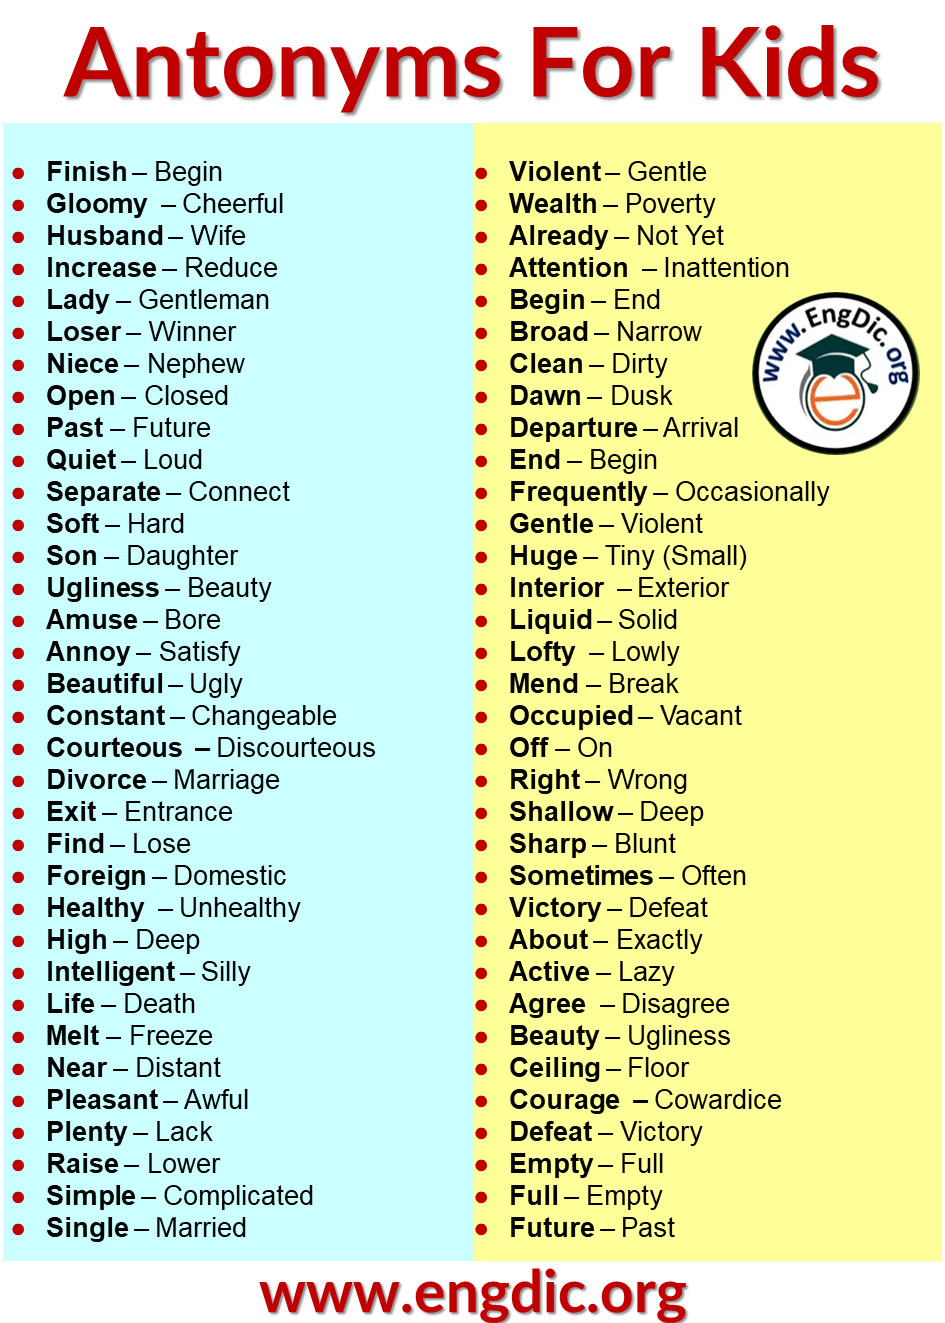 a list of antonyms for kids